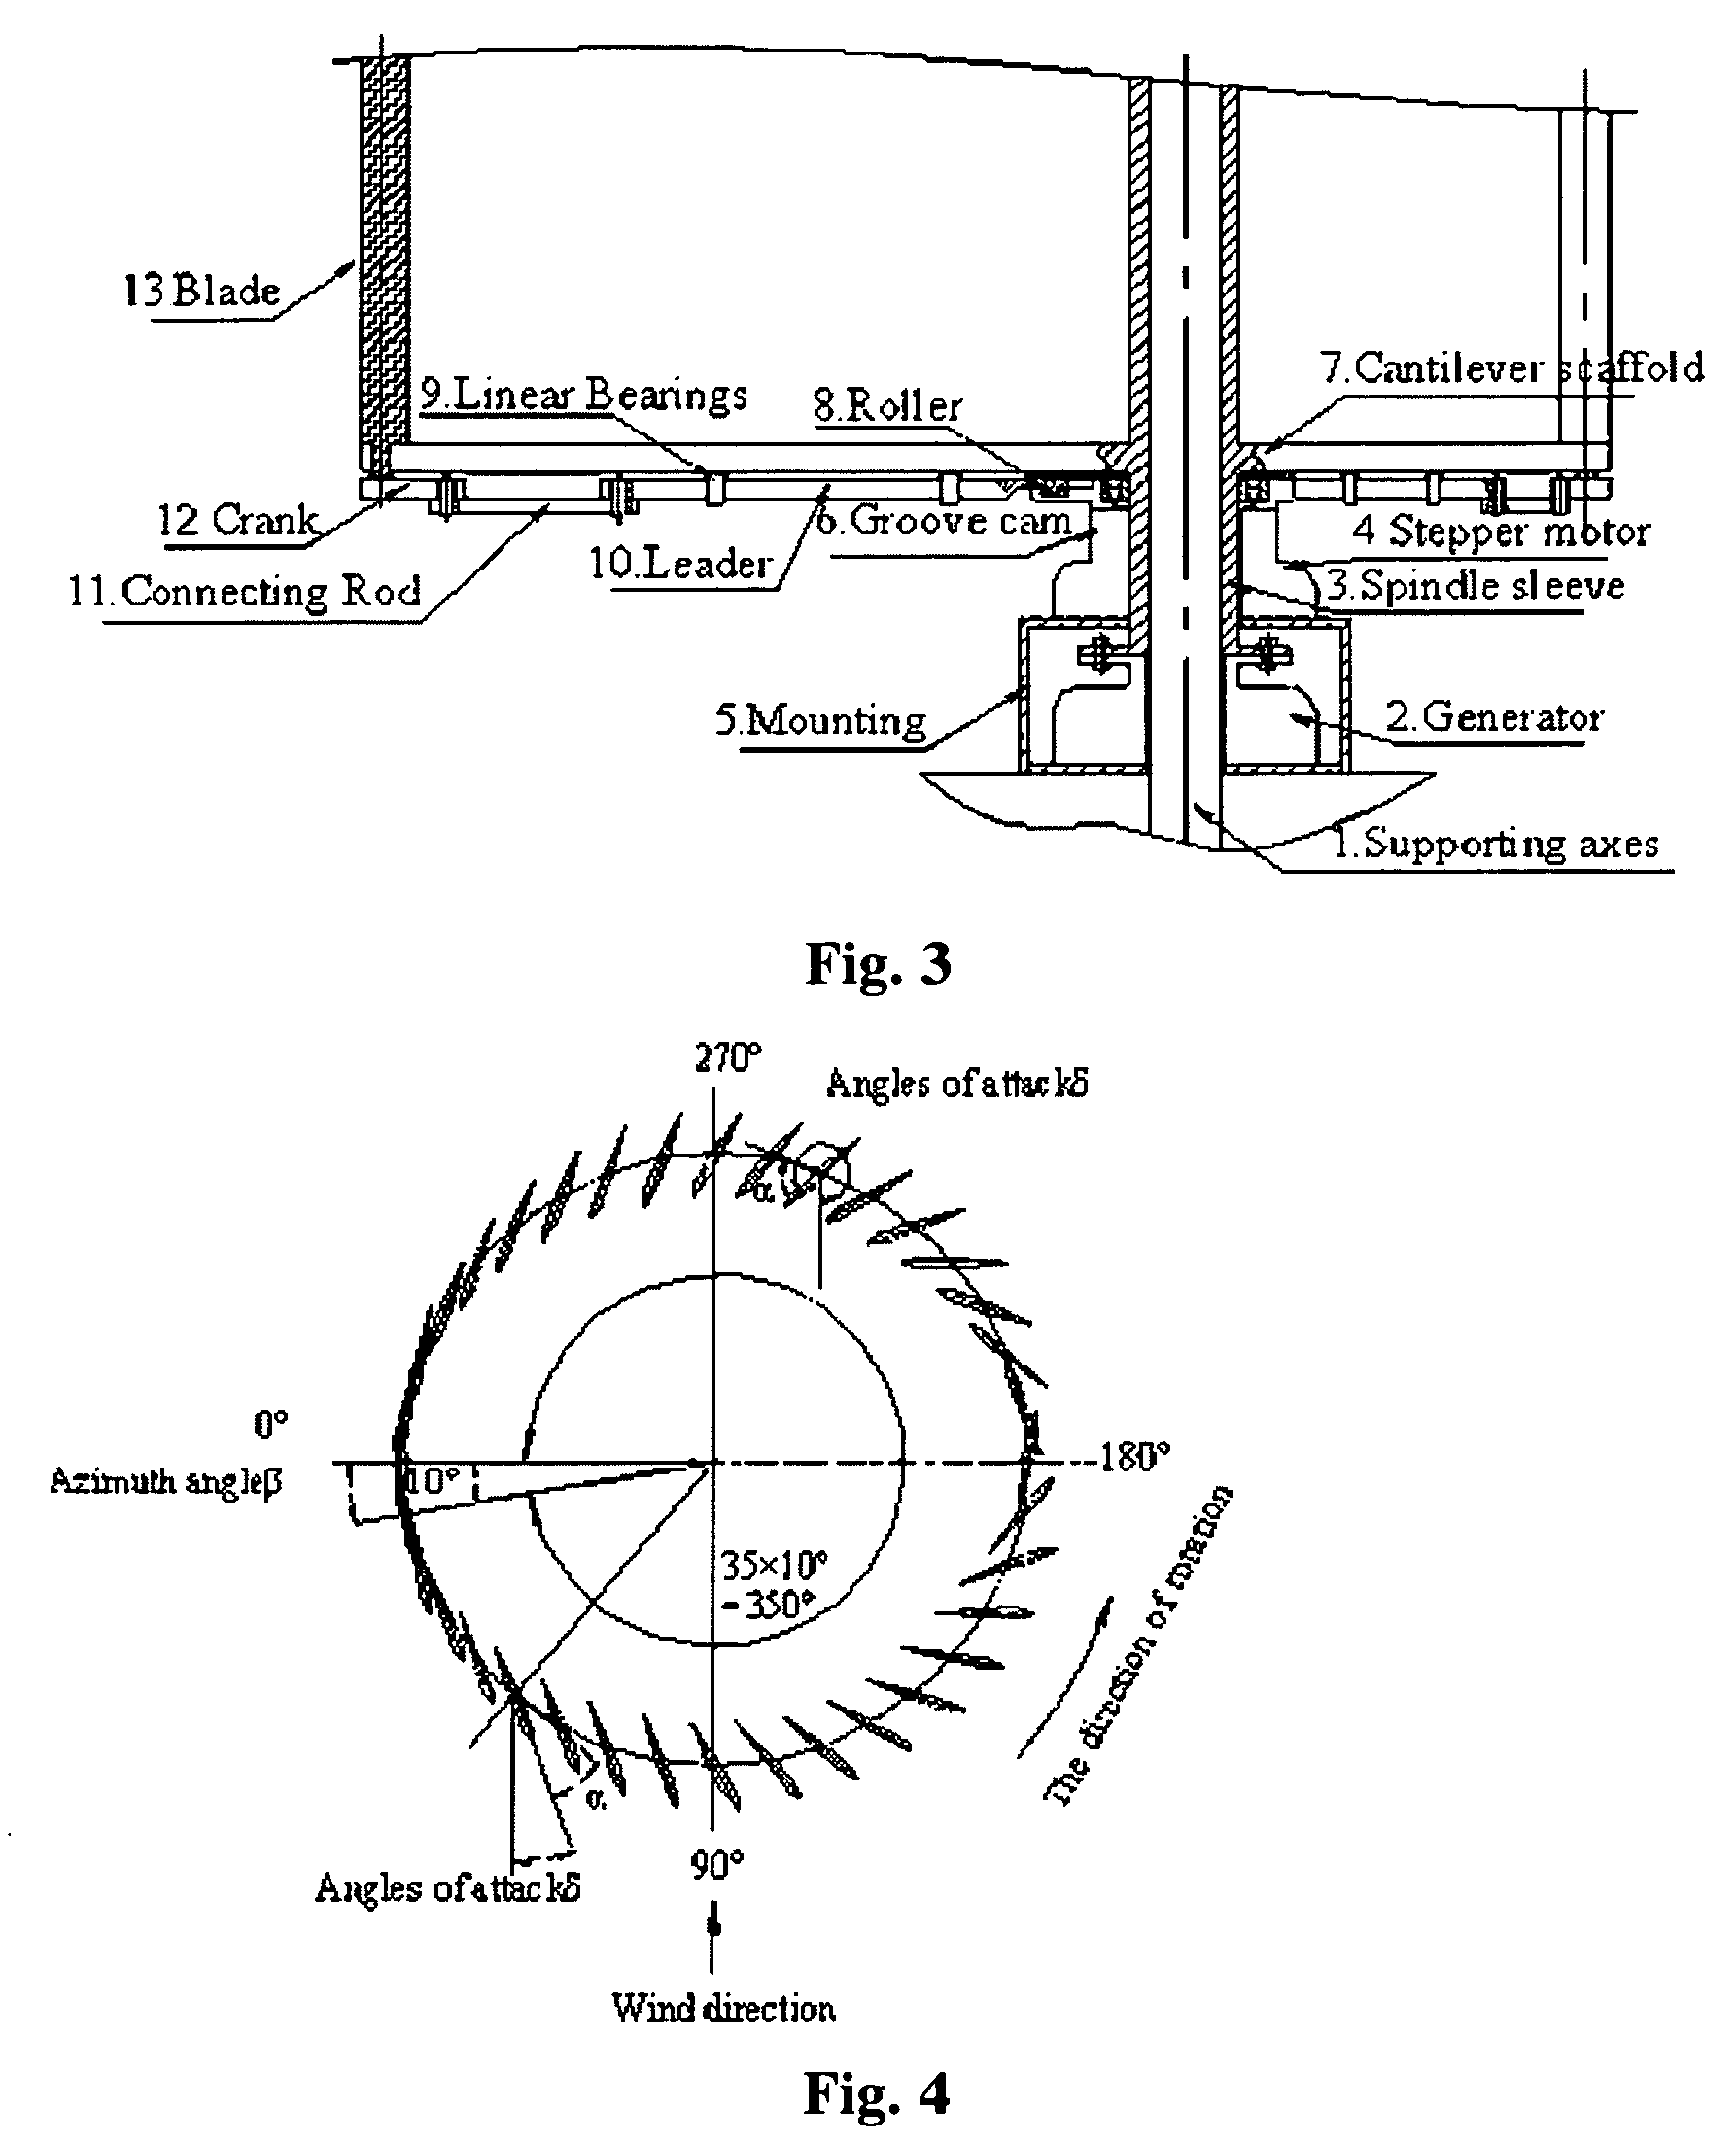 Device and method for adjusting angle-of-attack of wind blades in lift-type vertical axis wind turbine